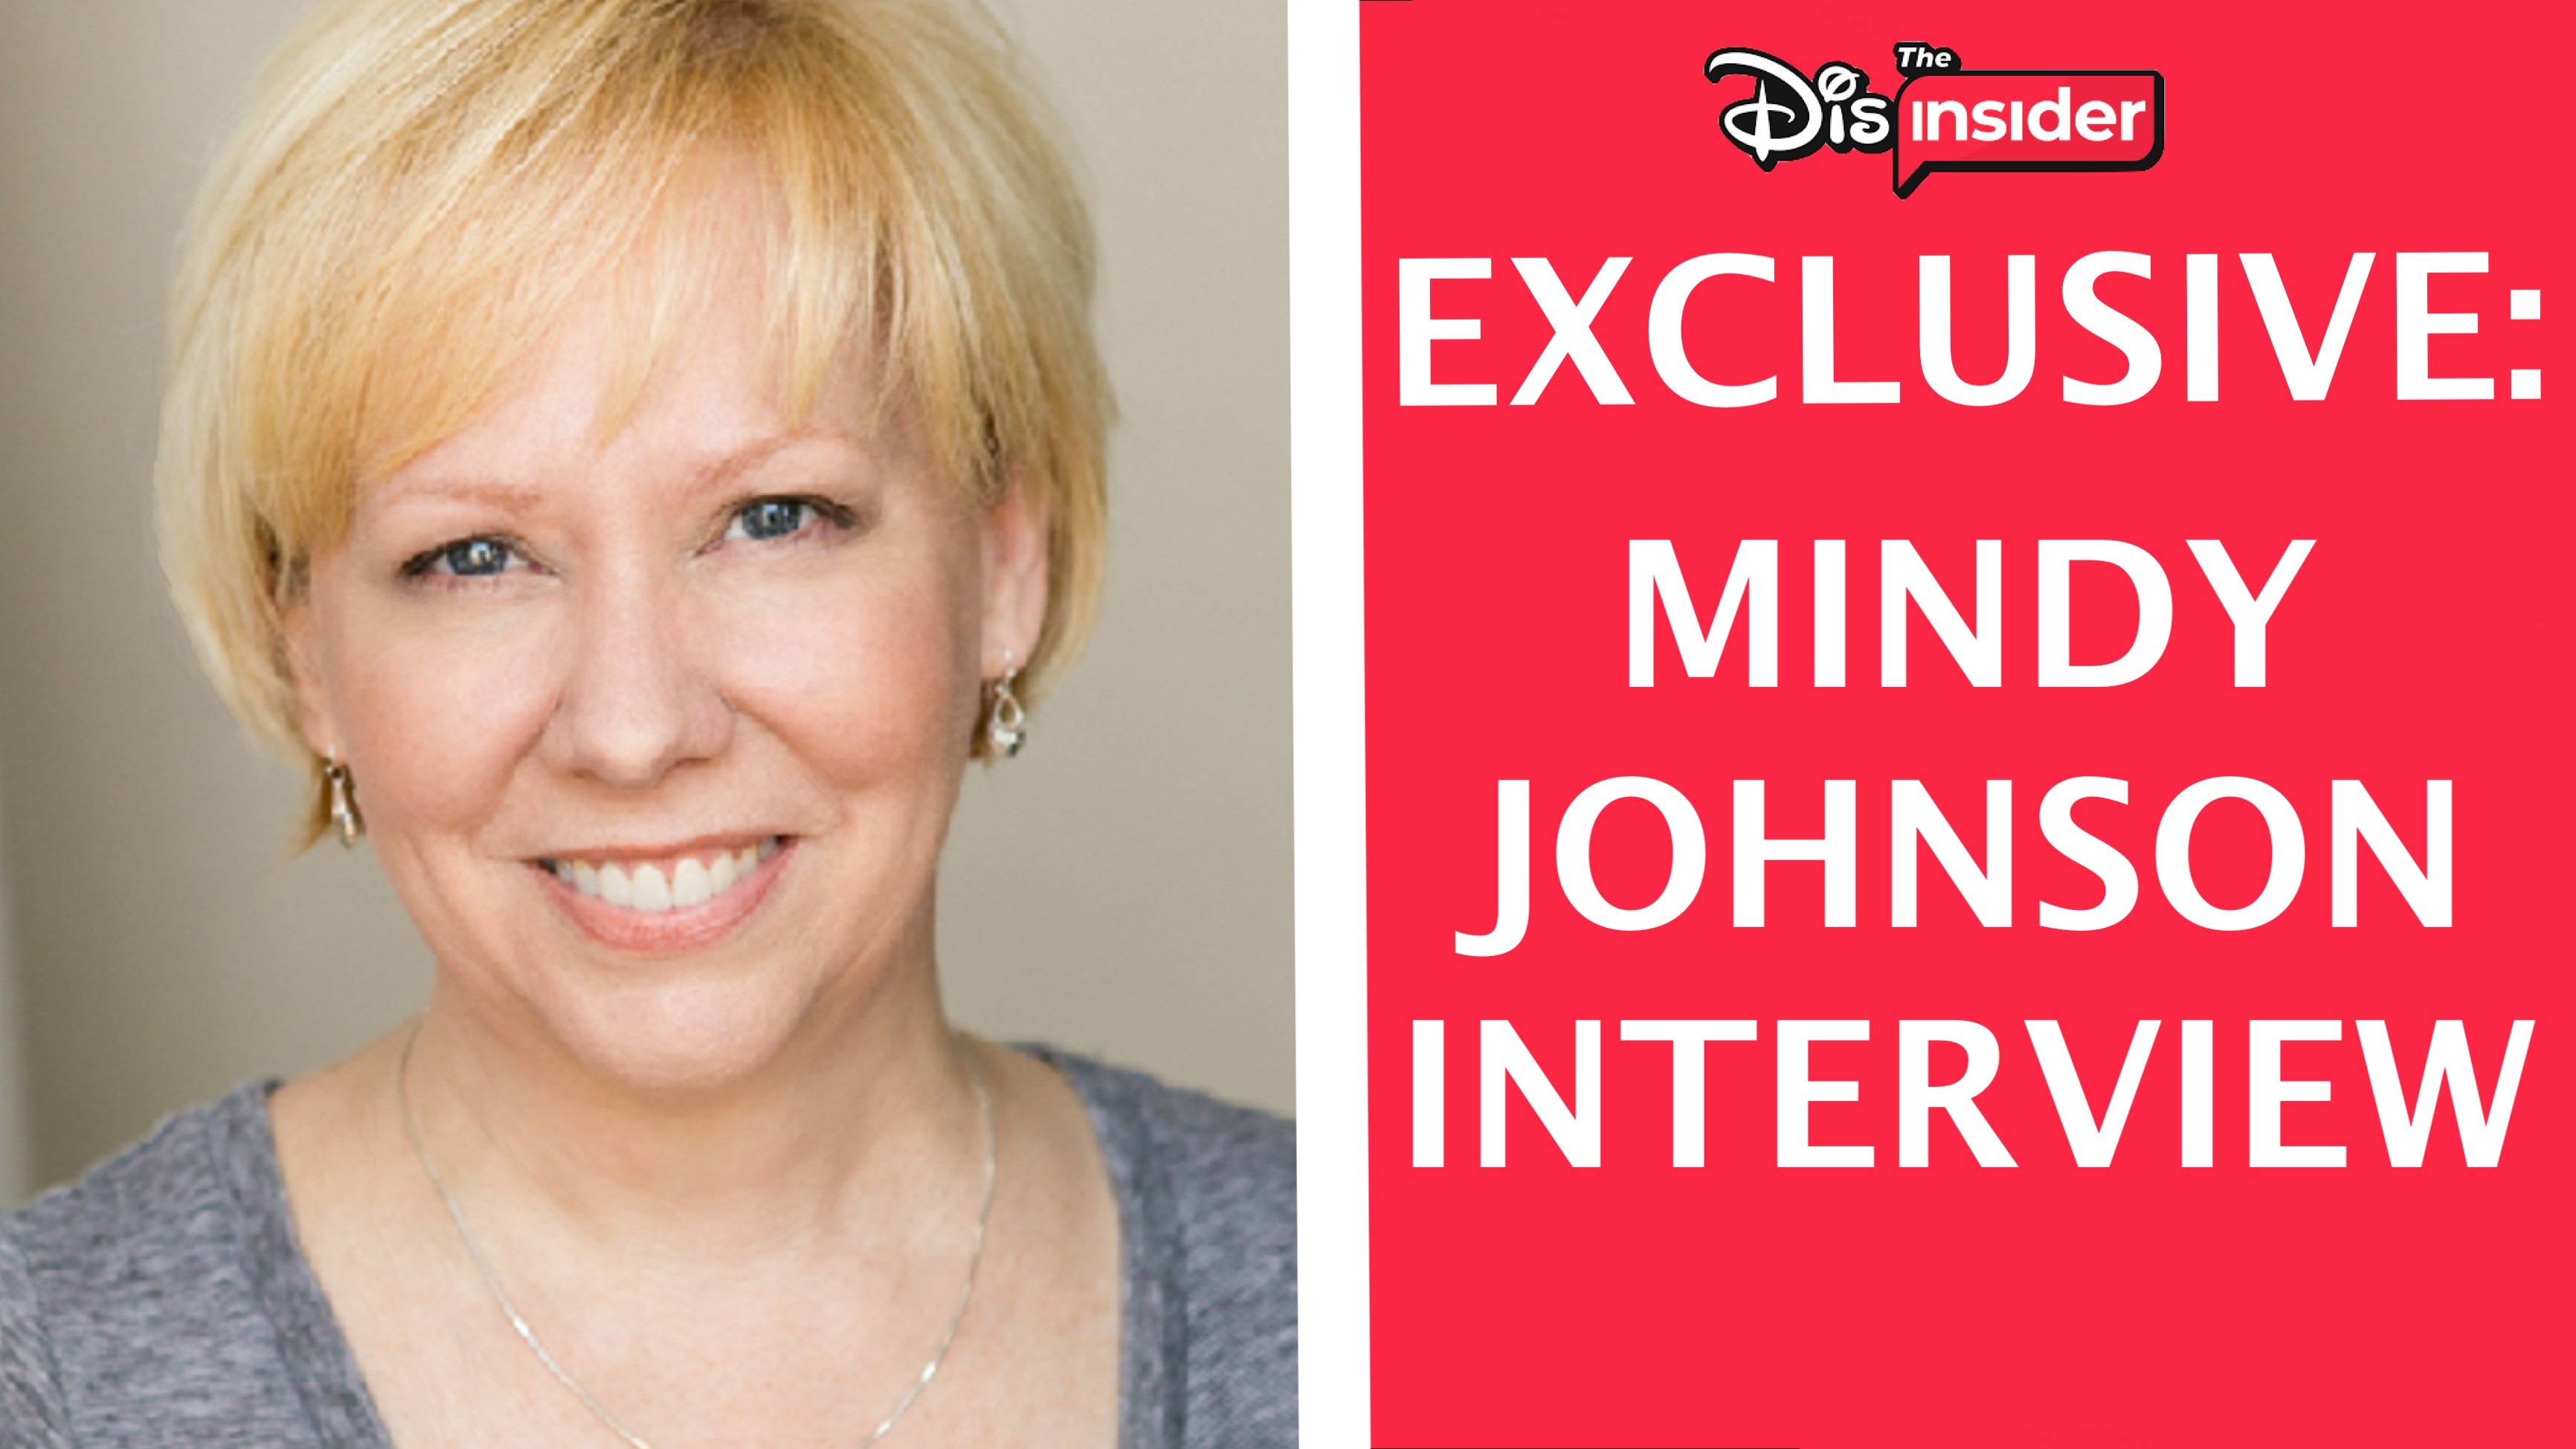 EXCLUSIVE: Film Historian Mindy Johnson Discusses Classic Disney Animation And The Uncredited Women Who Helped Create It (INTERVIEW)